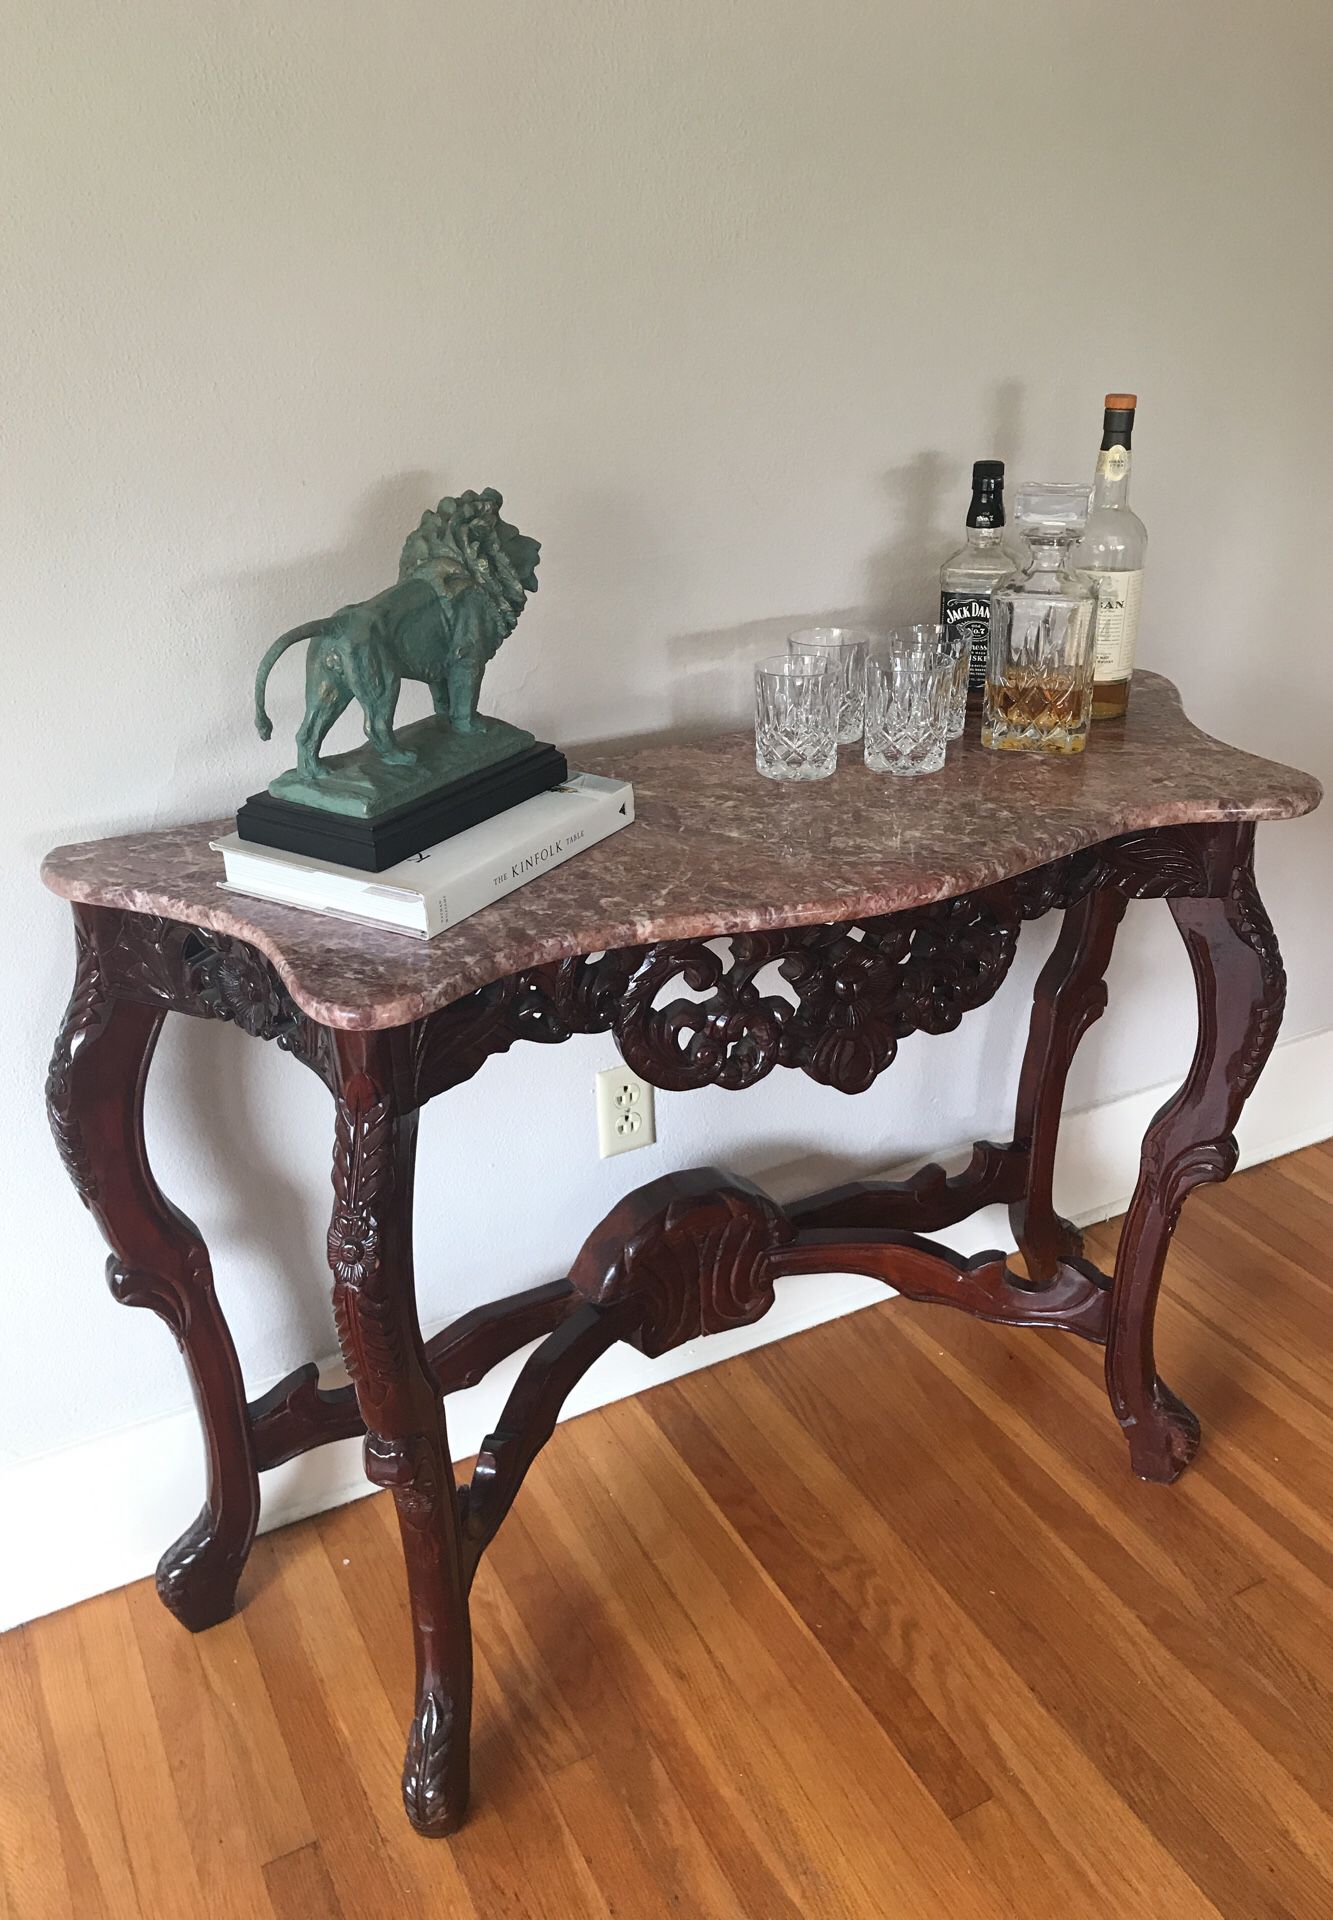 Toscanini Baroque Rose Marble Top Console Table (paid $800 new)